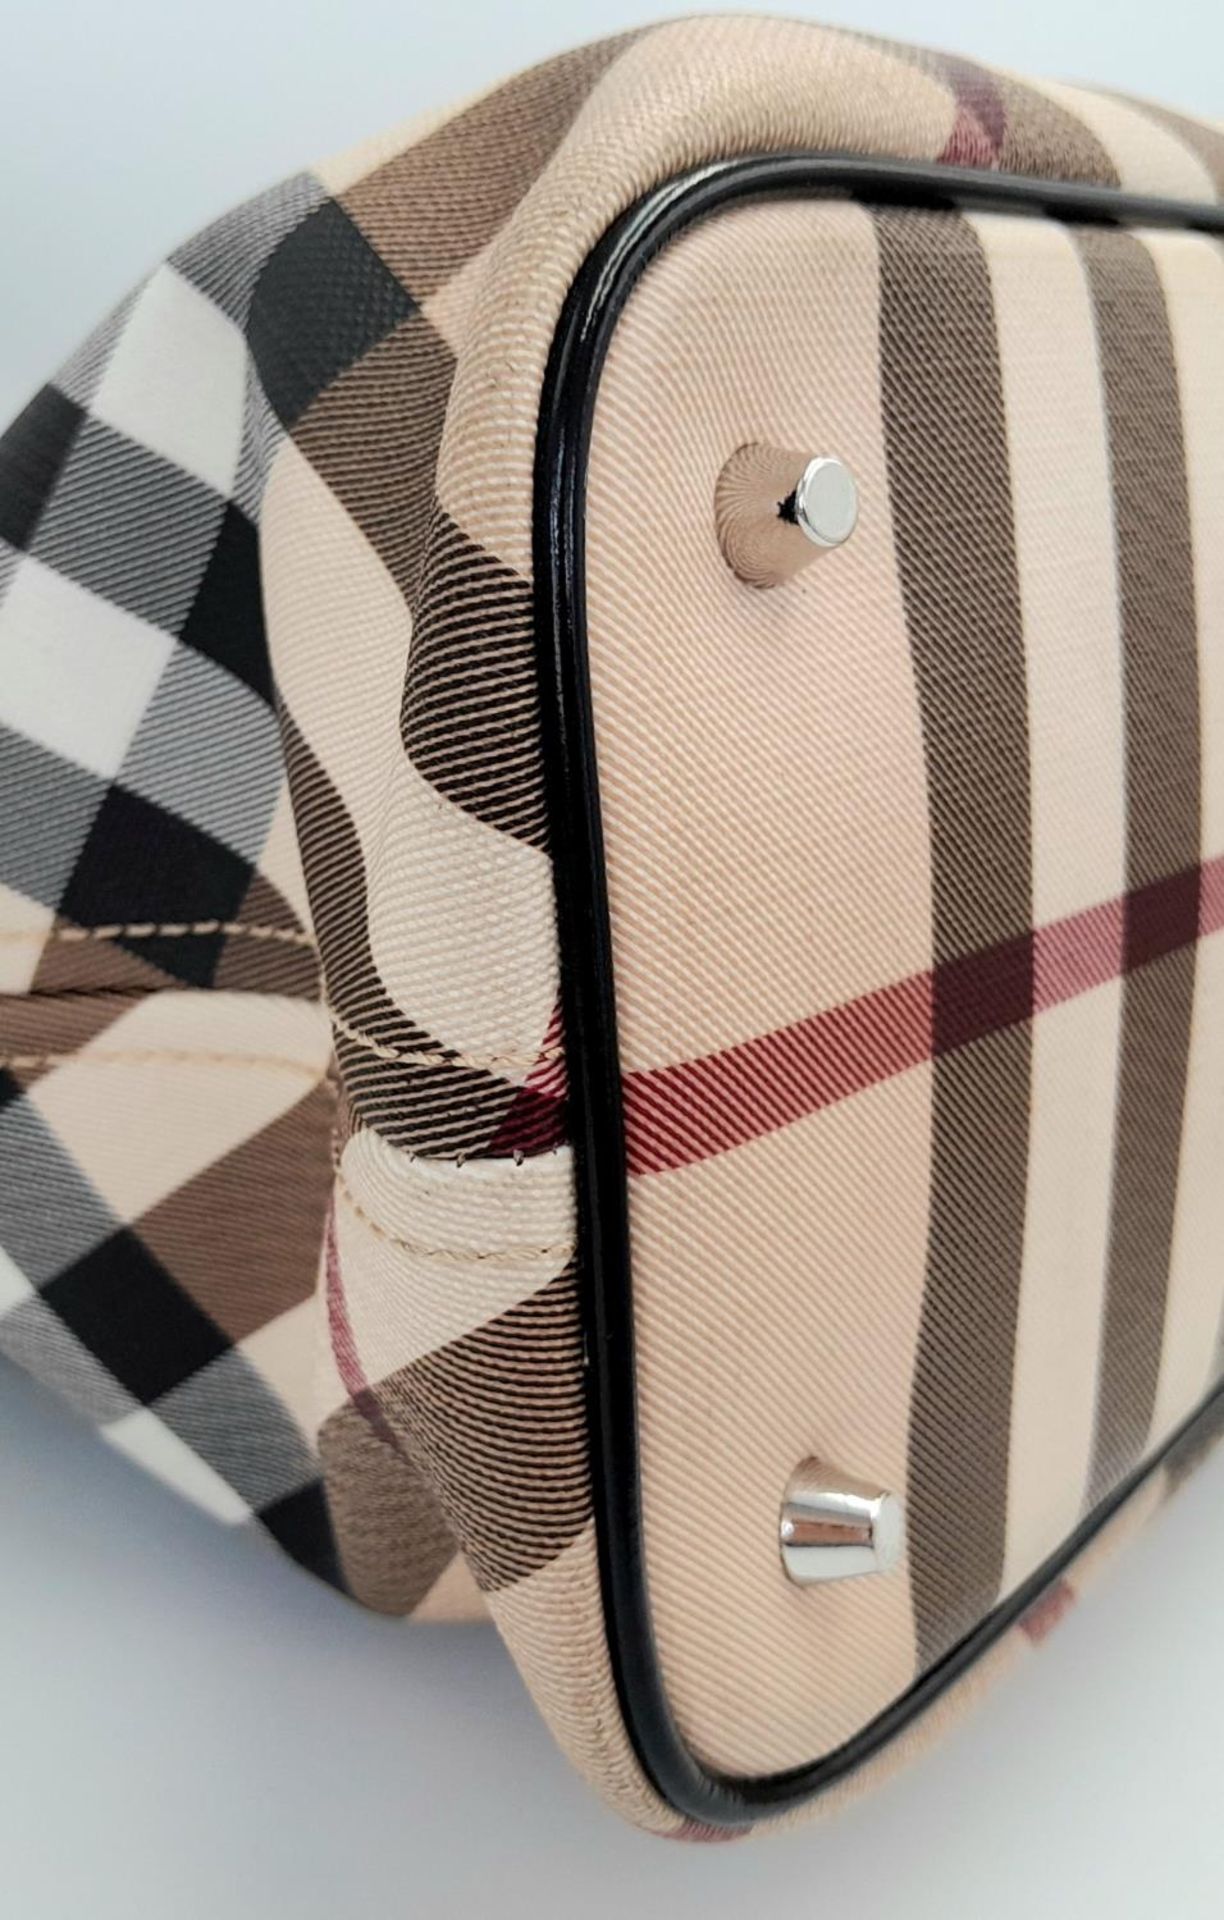 A Burberry Beige Check Nova Bag. Coated canvas exterior with leather trim, two leather straps, - Image 5 of 13